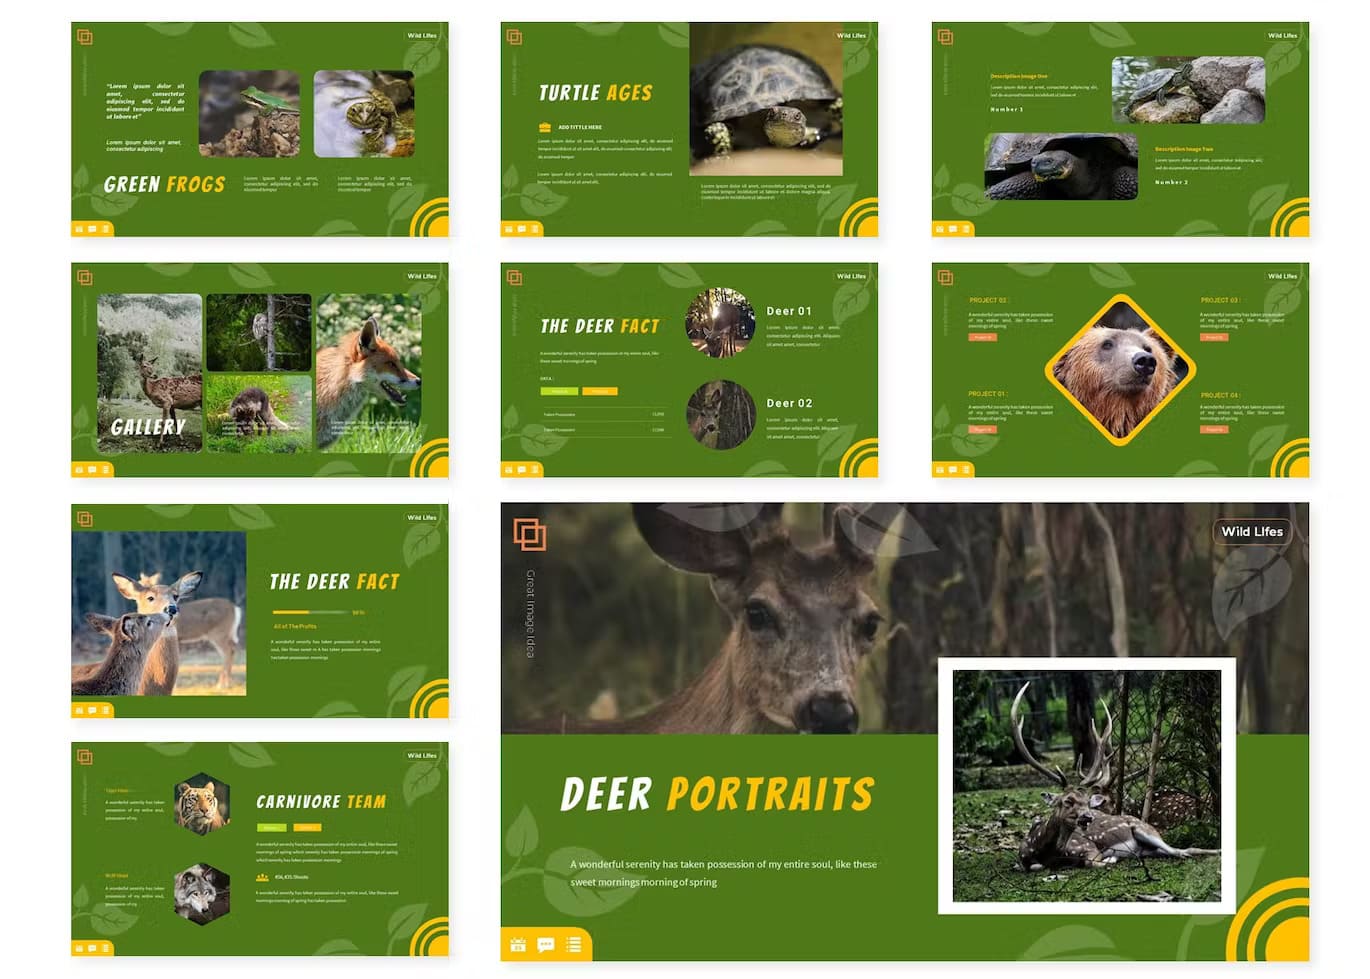 Linkxs detail and donkey fact on the slides of Animal Looklike | Powerpoint Template.